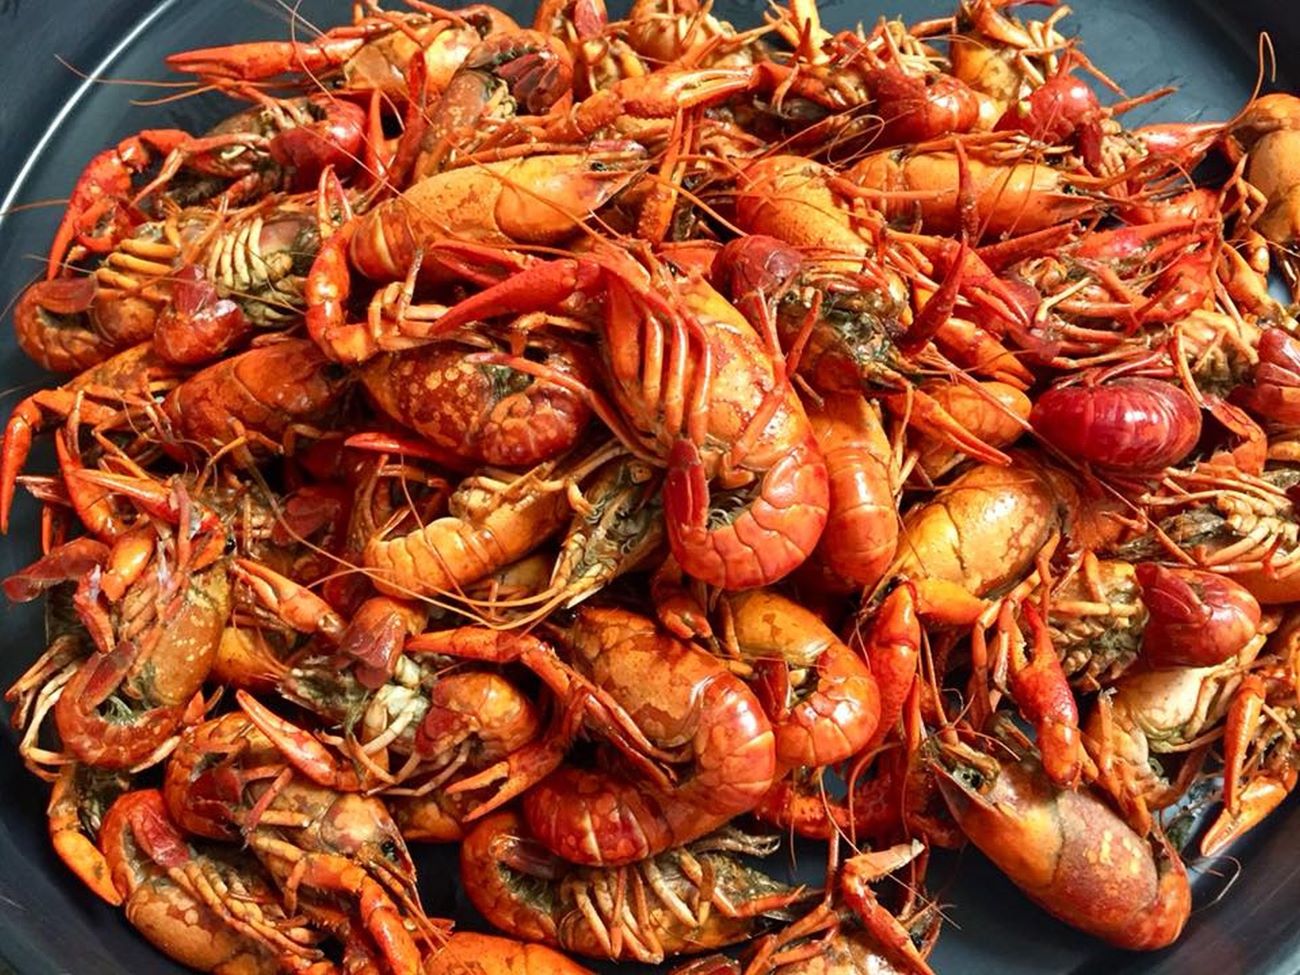 cooked crawfish from dauphin island